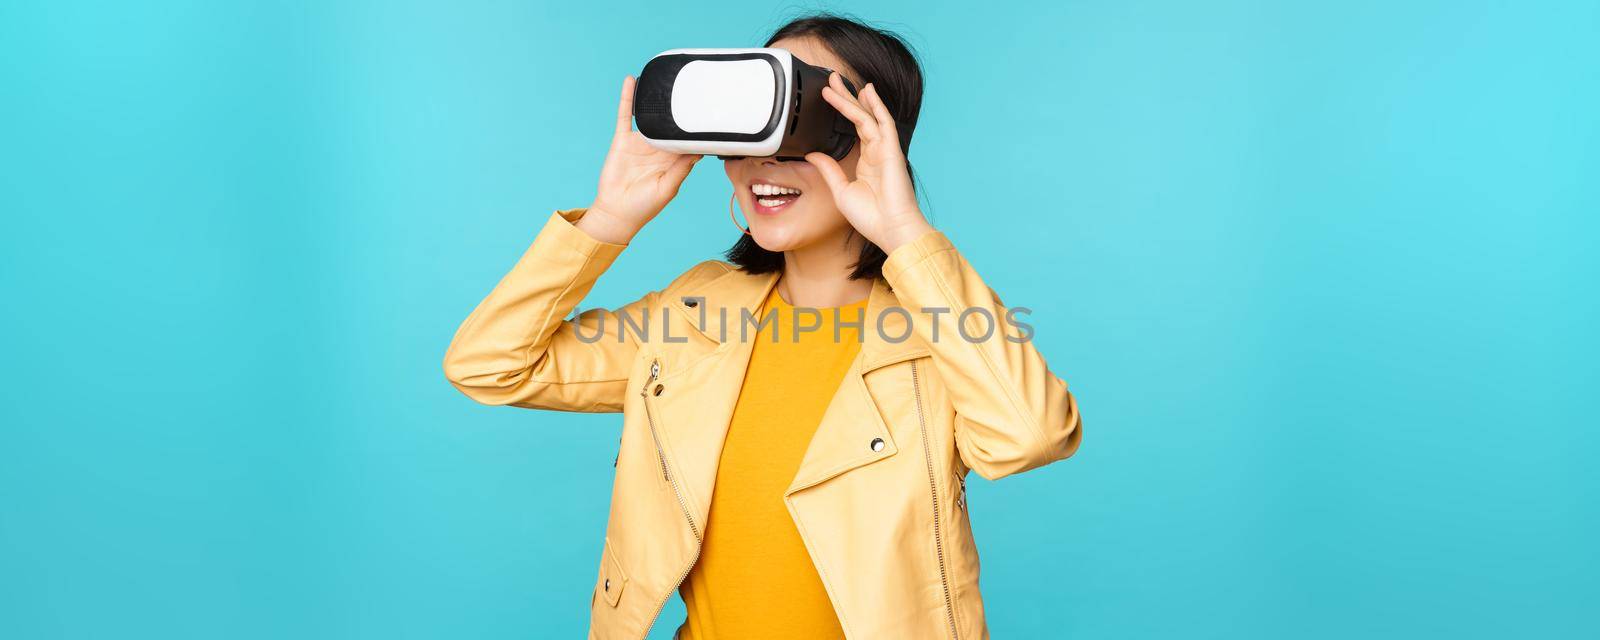 Portrait of happy asian female model using VR headset, smiling and laughing in virtual reality glasses, standing over blue background.